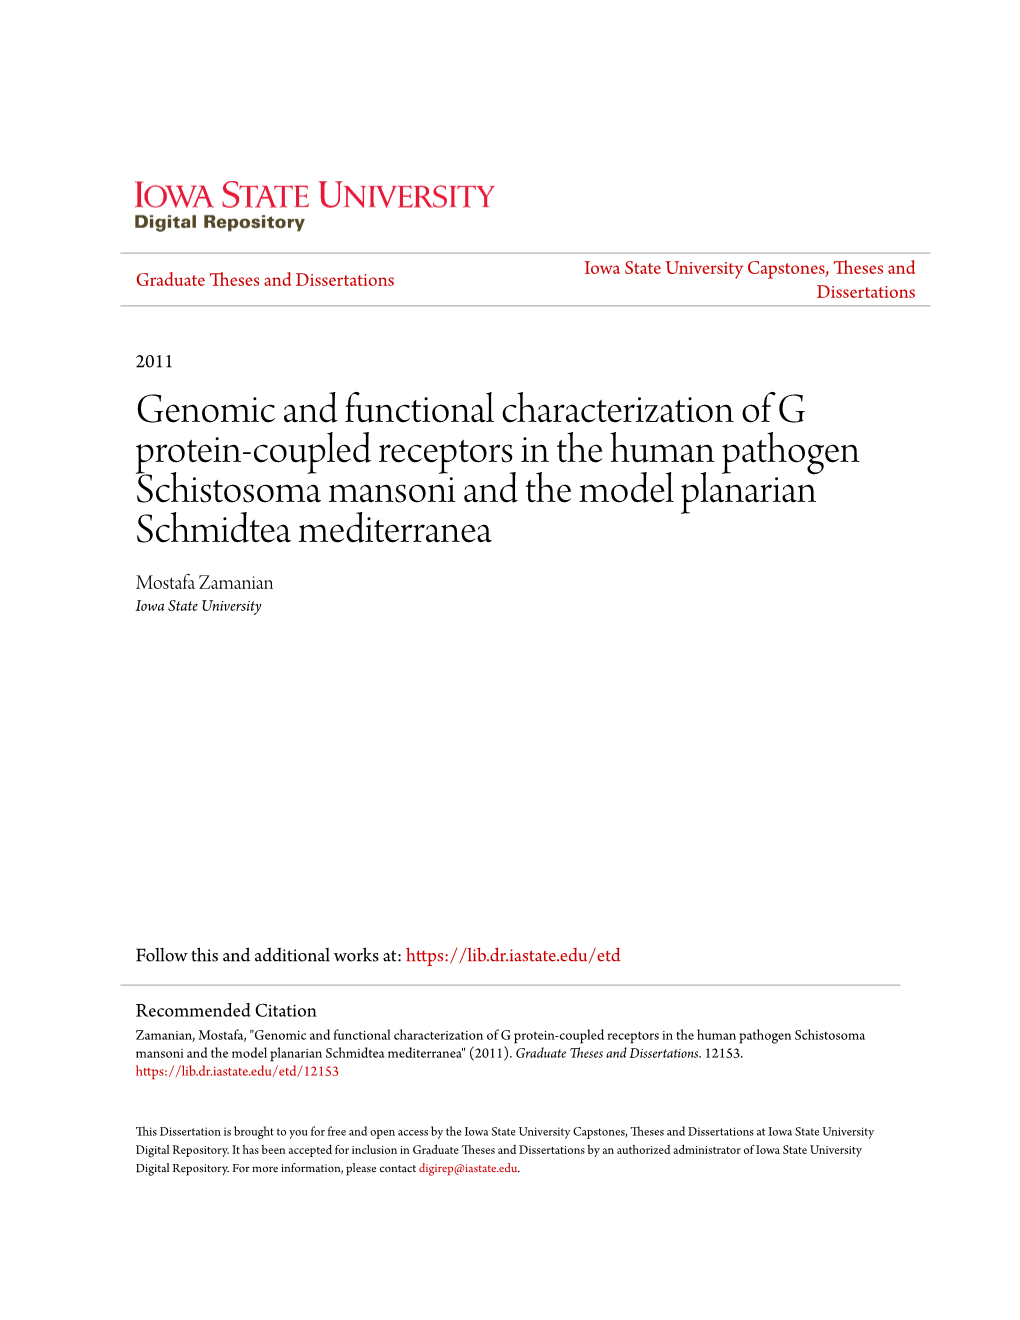 Genomic and Functional Characterization of G Protein